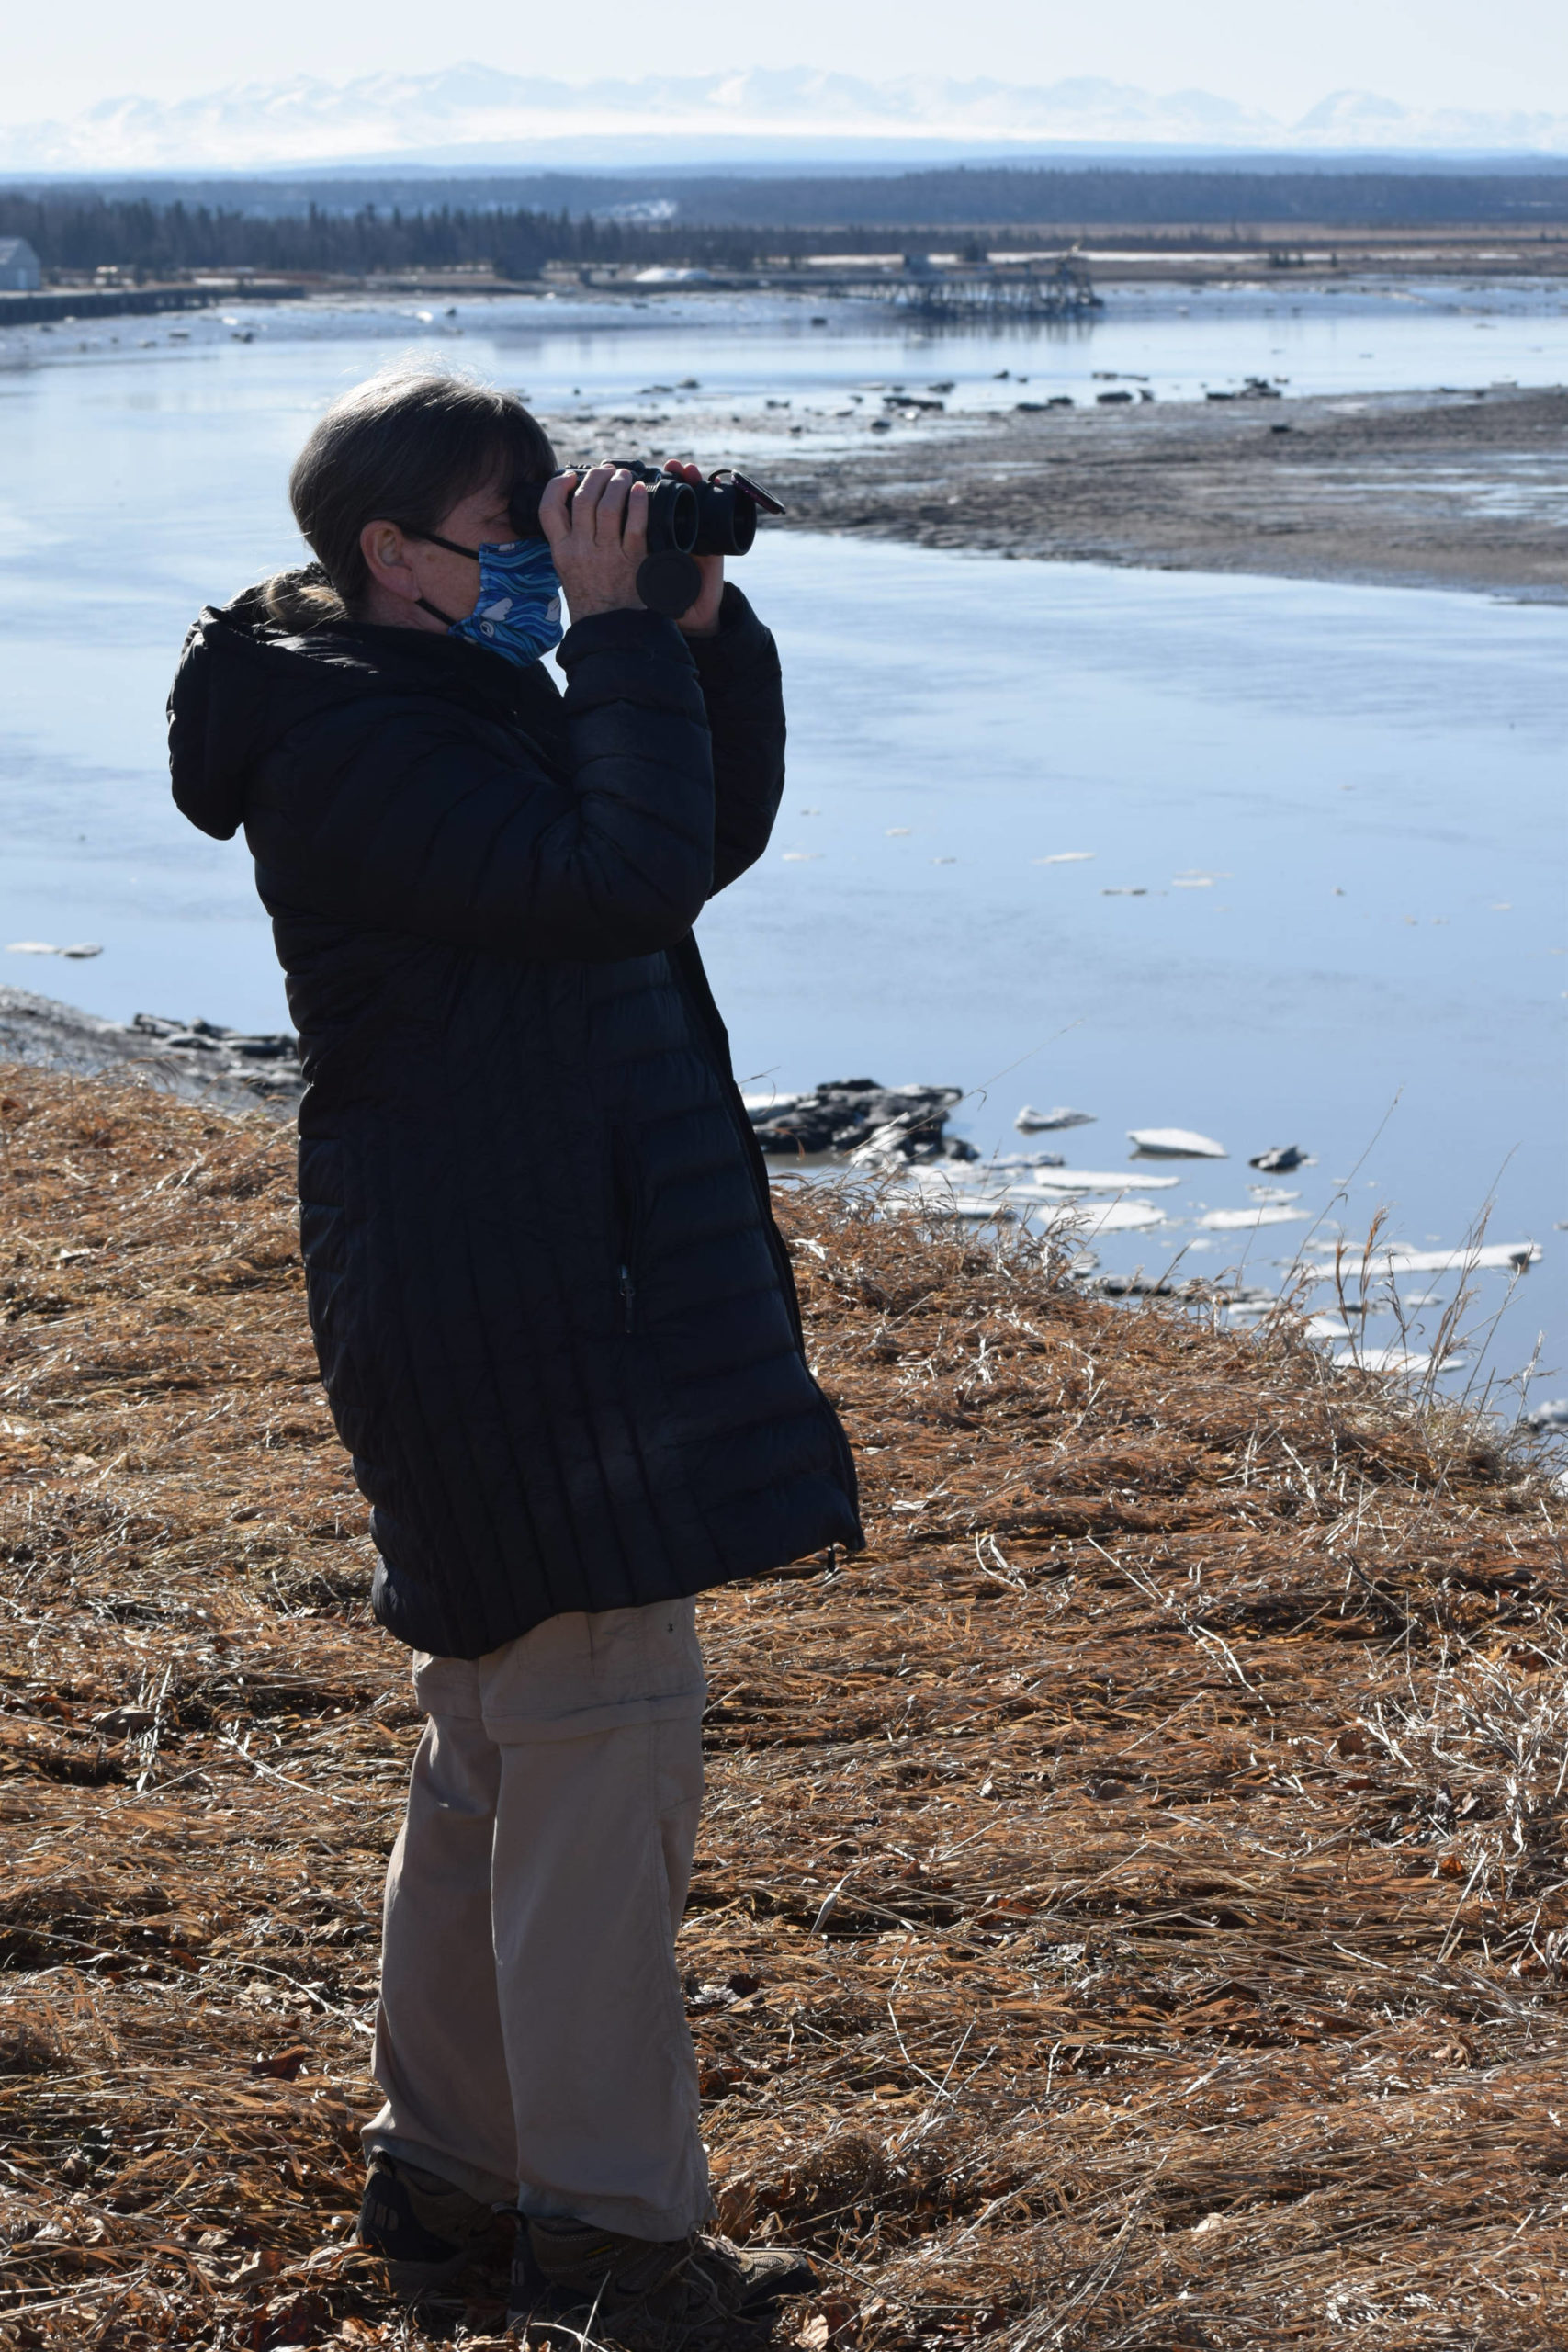 Teresa Becher watches as beluga whales swim up the Kenai River on Saturday, April 24, 2021. She and her volunteer team monitor belugas in the Cook Inlet. (Photo by Camille Botello/Peninsula Clarion)